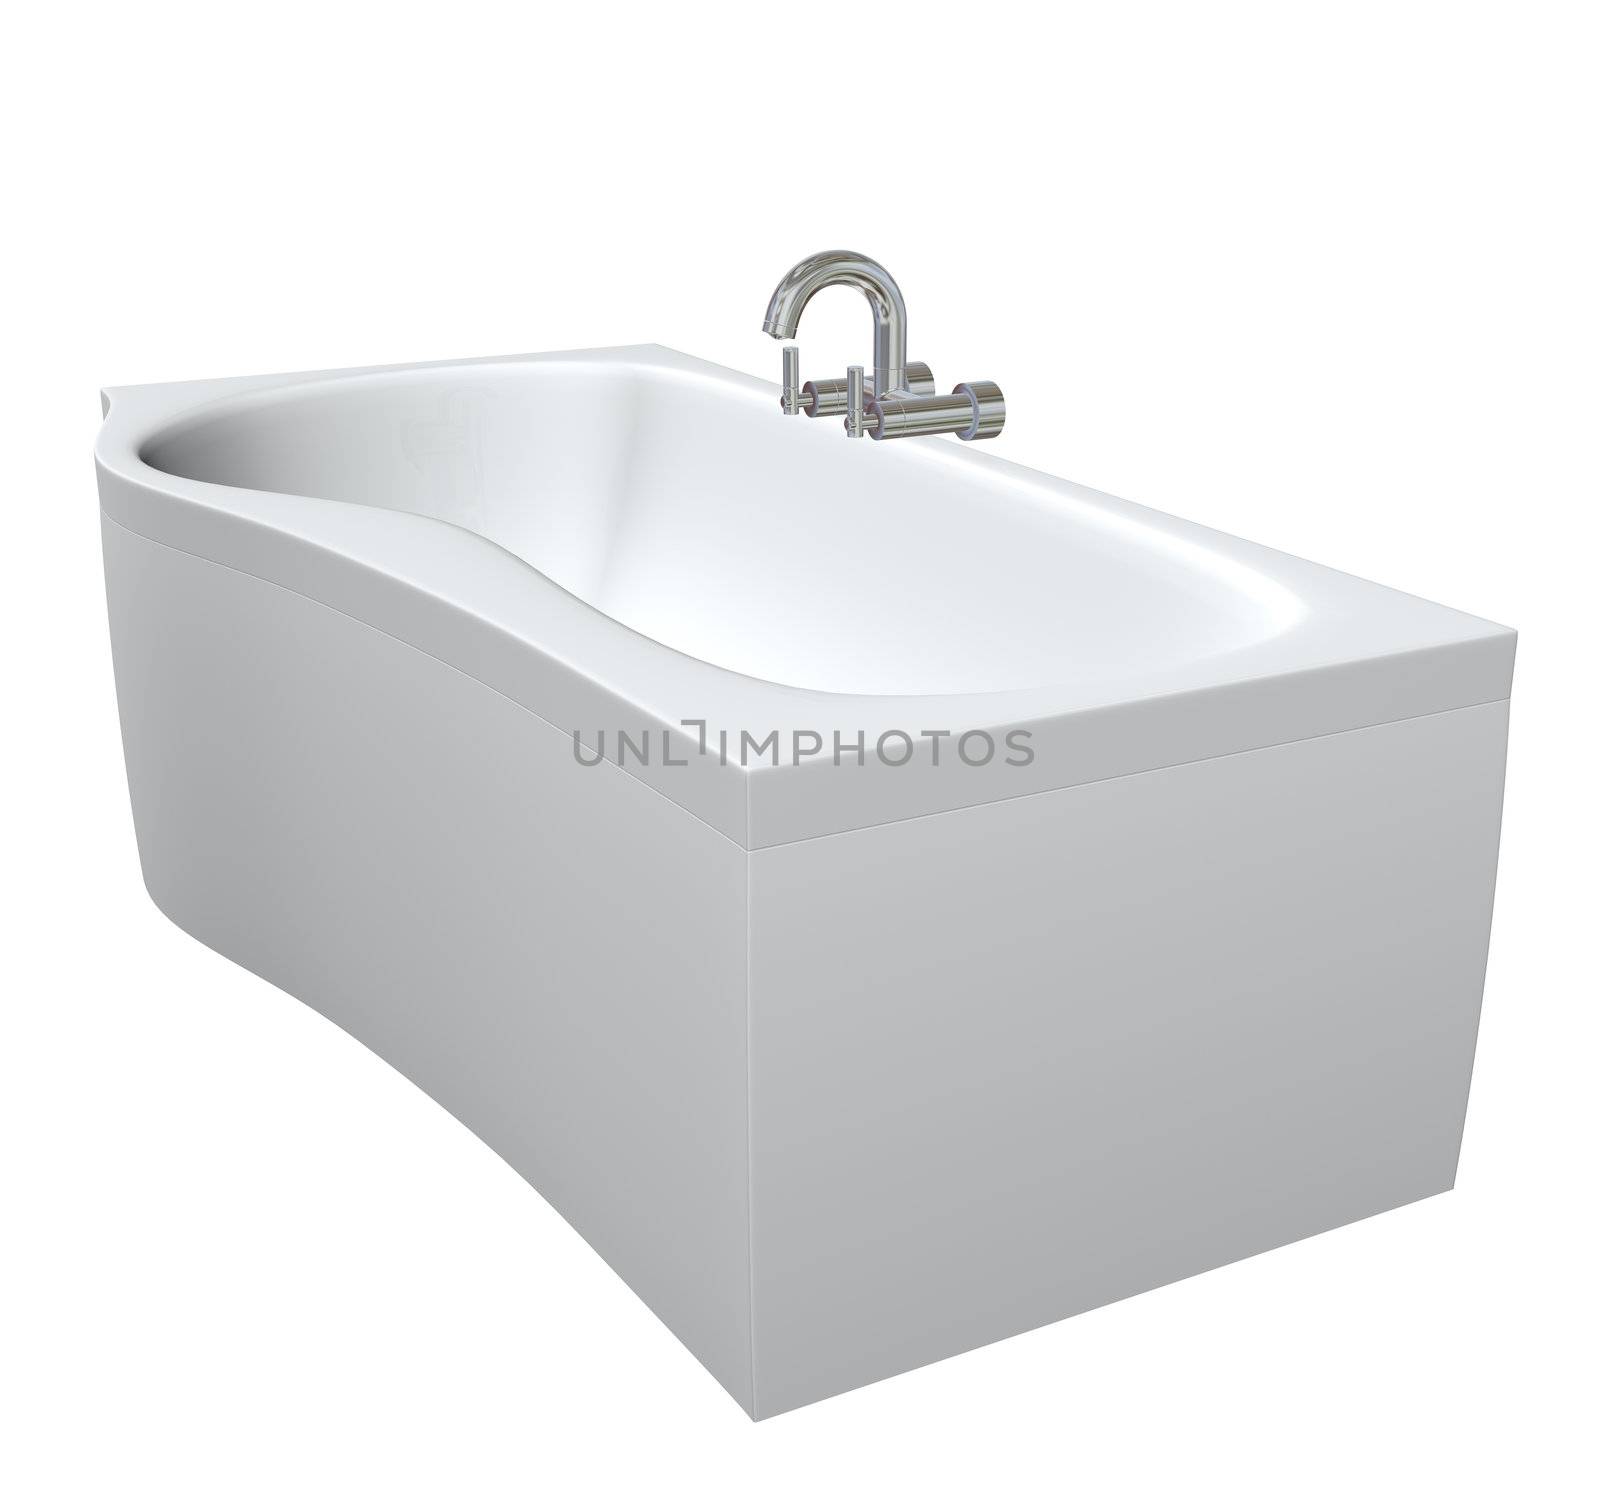 Ceramic or acrylc bath tub set with chrome fixtures and faucet,  by Morphart